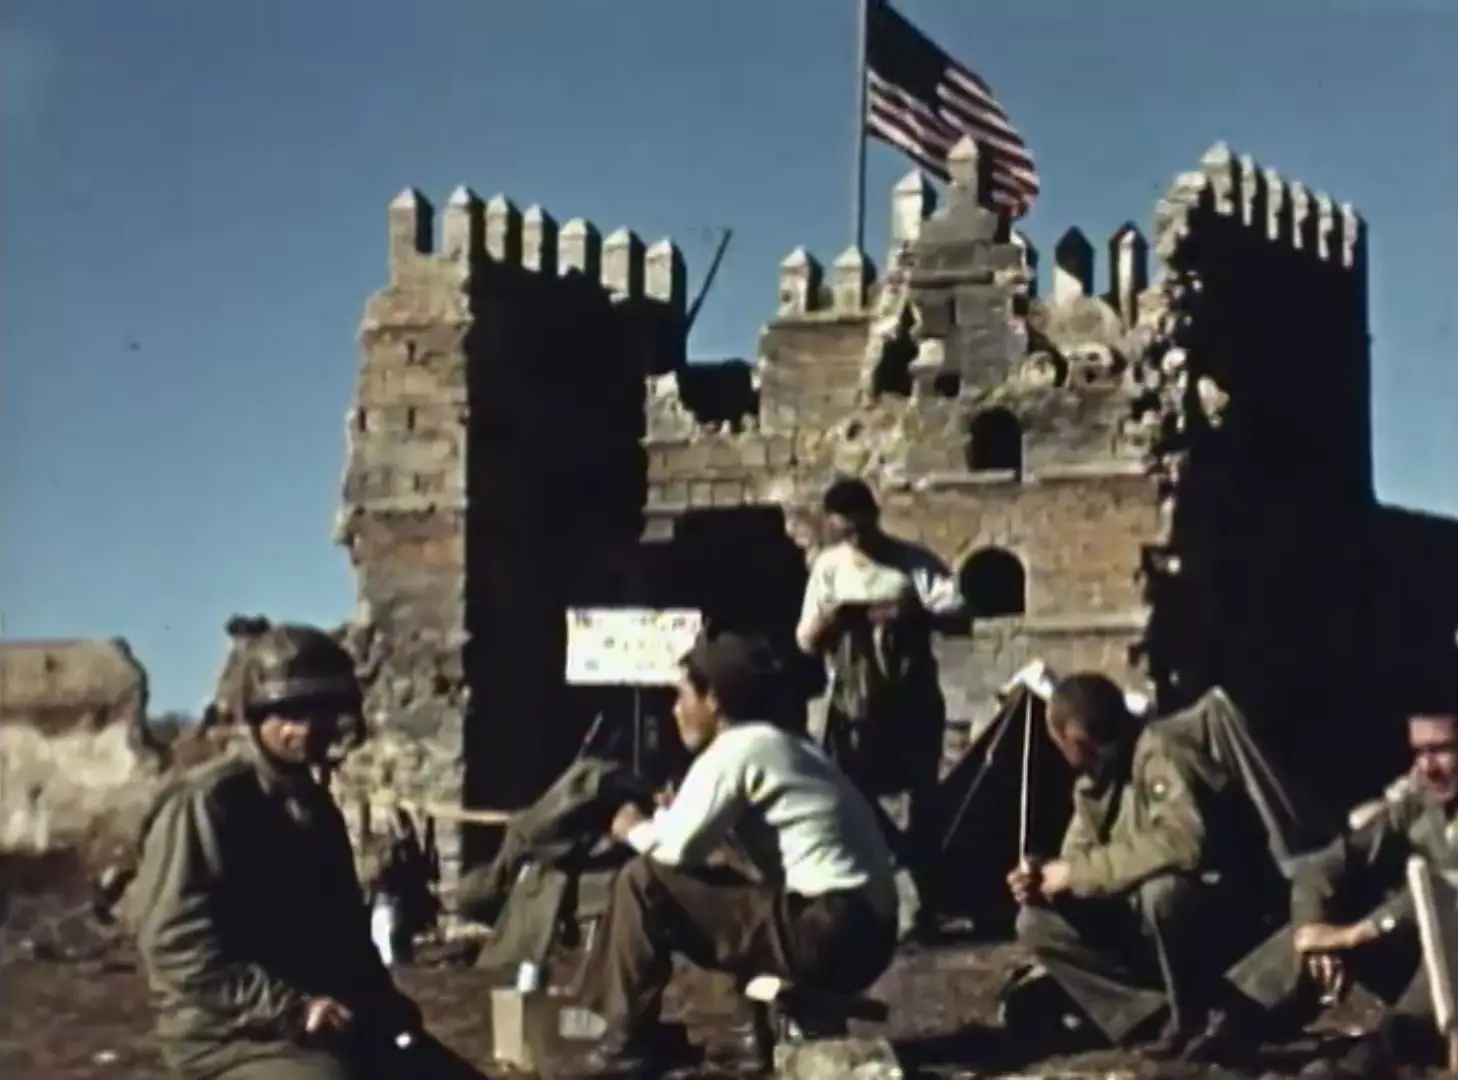 A fuzzy still taken from color film showing American soldiers resting outside a severely damaged stone gatehouse with an American flag flying above.